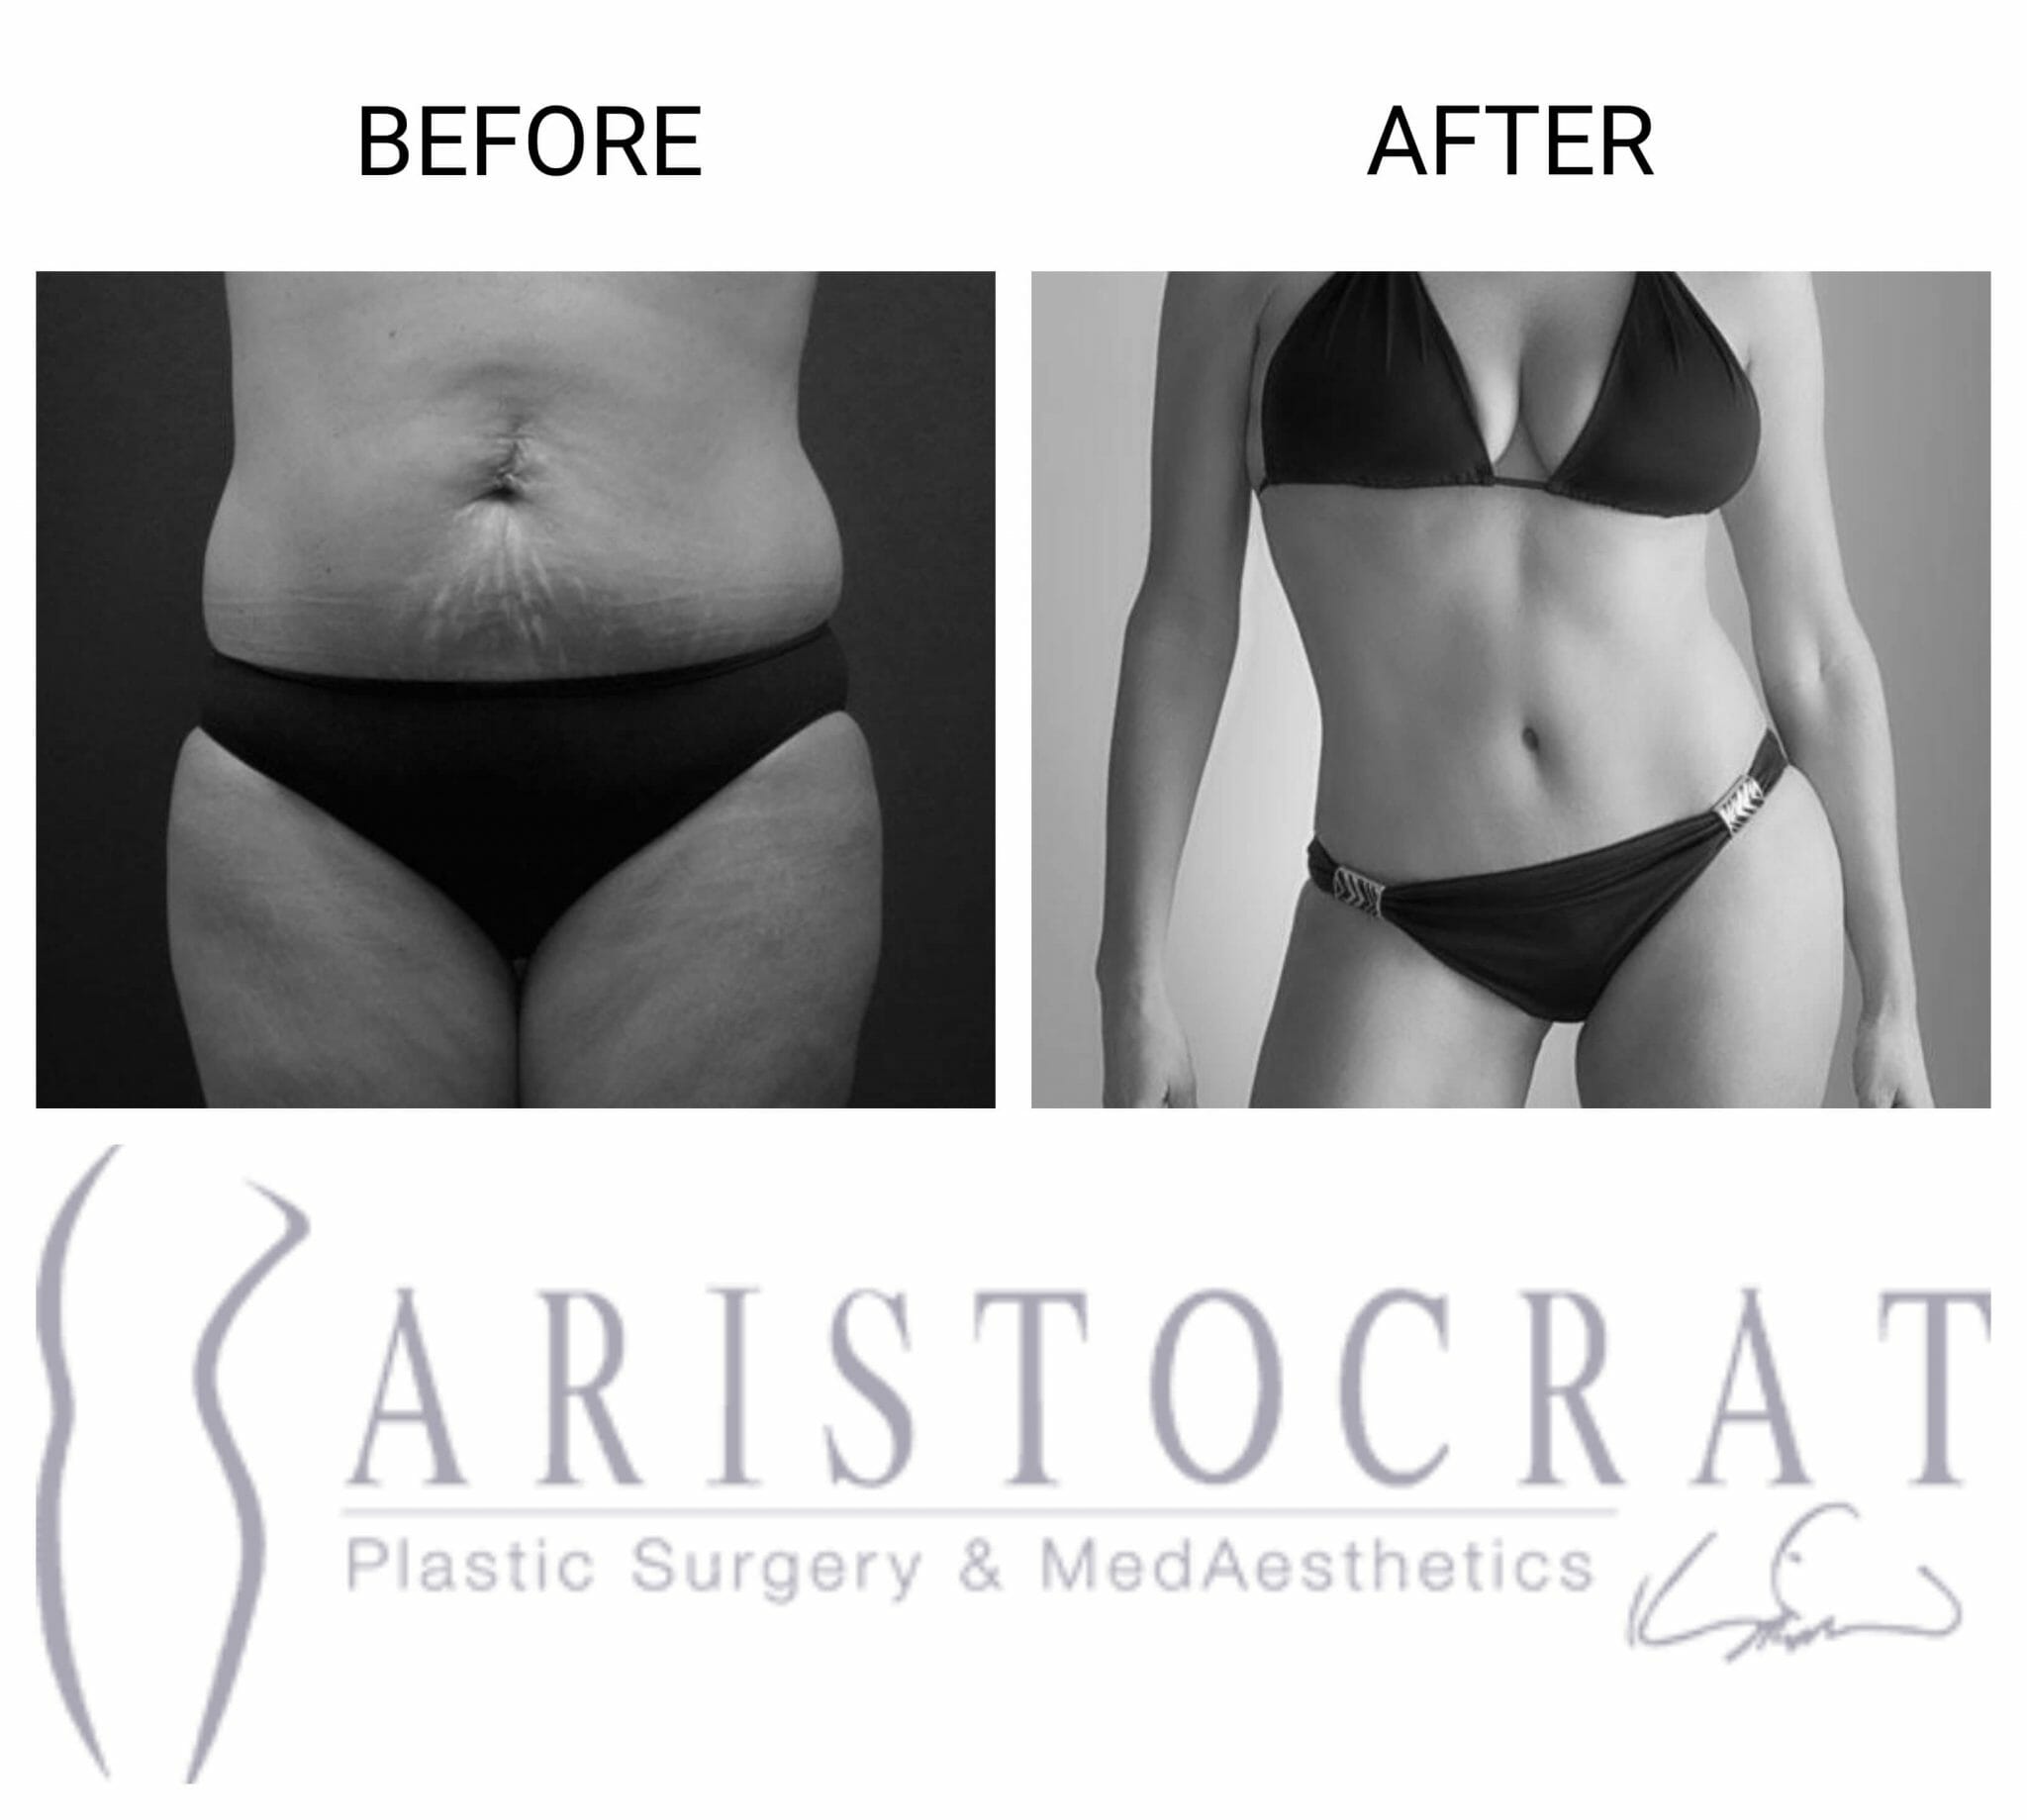 Liposuction - Inner and/or Outer Thighs Before and After Photo